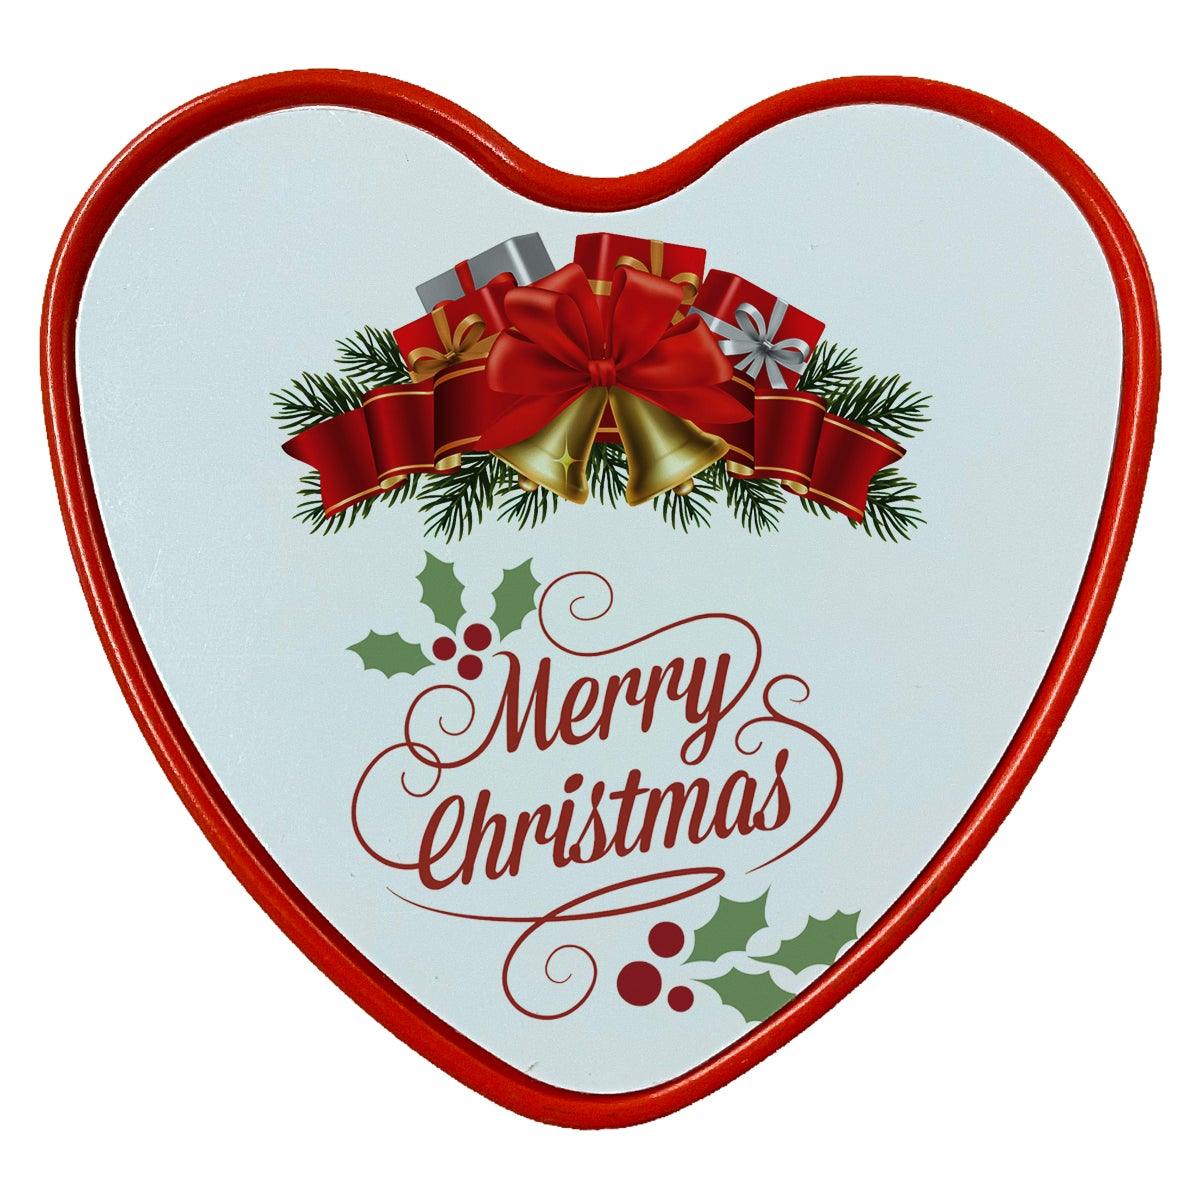 ShopQuality4U Merry Christmas Heart Tin Red Heart Shaped Tins With Scented Rose Candle for him or her